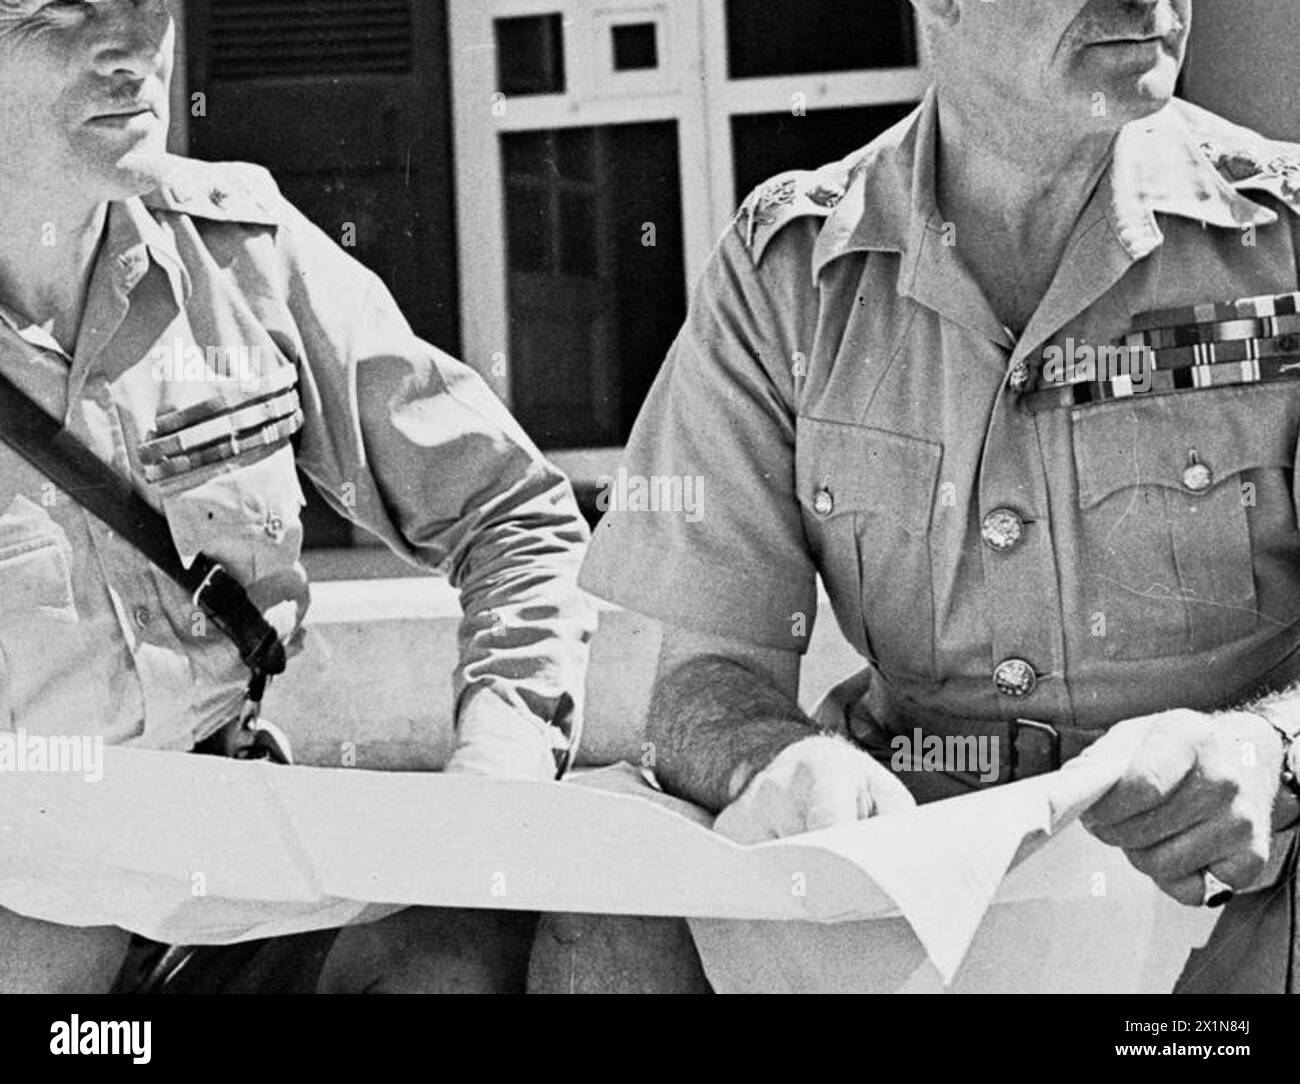 THE CAMPAIGN IN NORTH AFRICA 1940-1943: PERSONALITIES - General Sir Archibald Wavell, Commander in Chief India and General Sir Claude Auchinleck Commander in Chief Middle East, Stock Photo